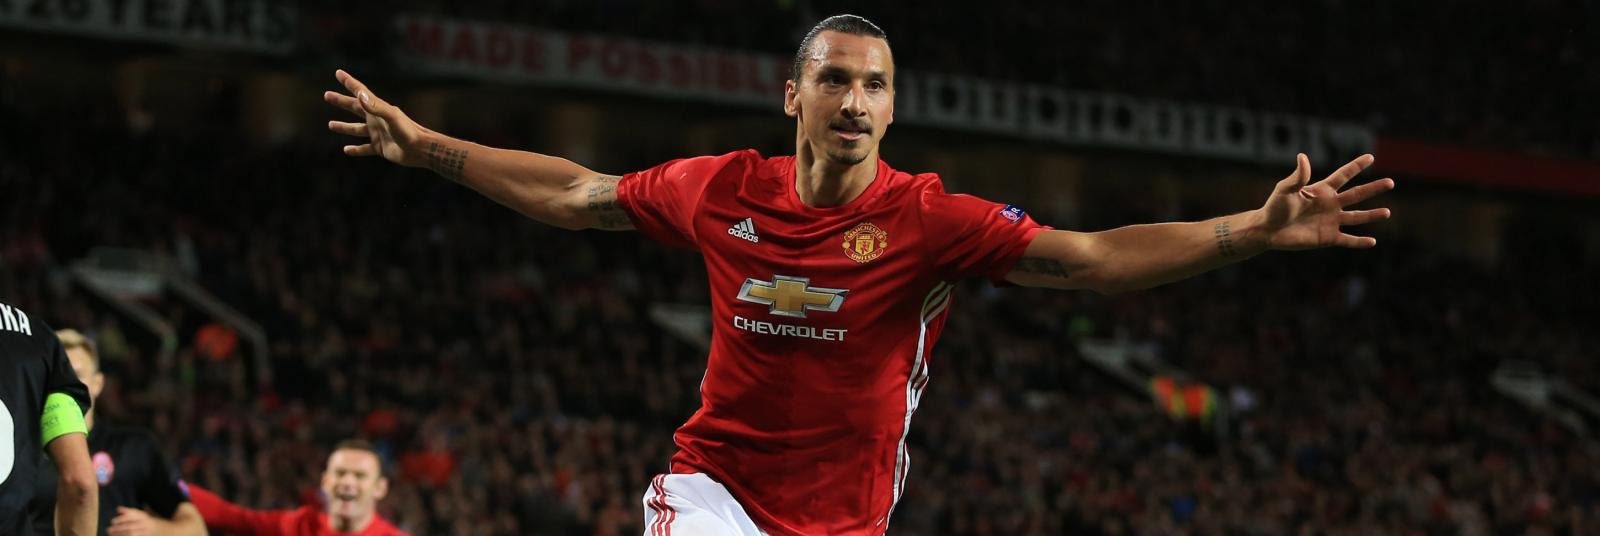 Expert: “Ibrahimovic should have chosen an easier path to retirement than Manchester United’